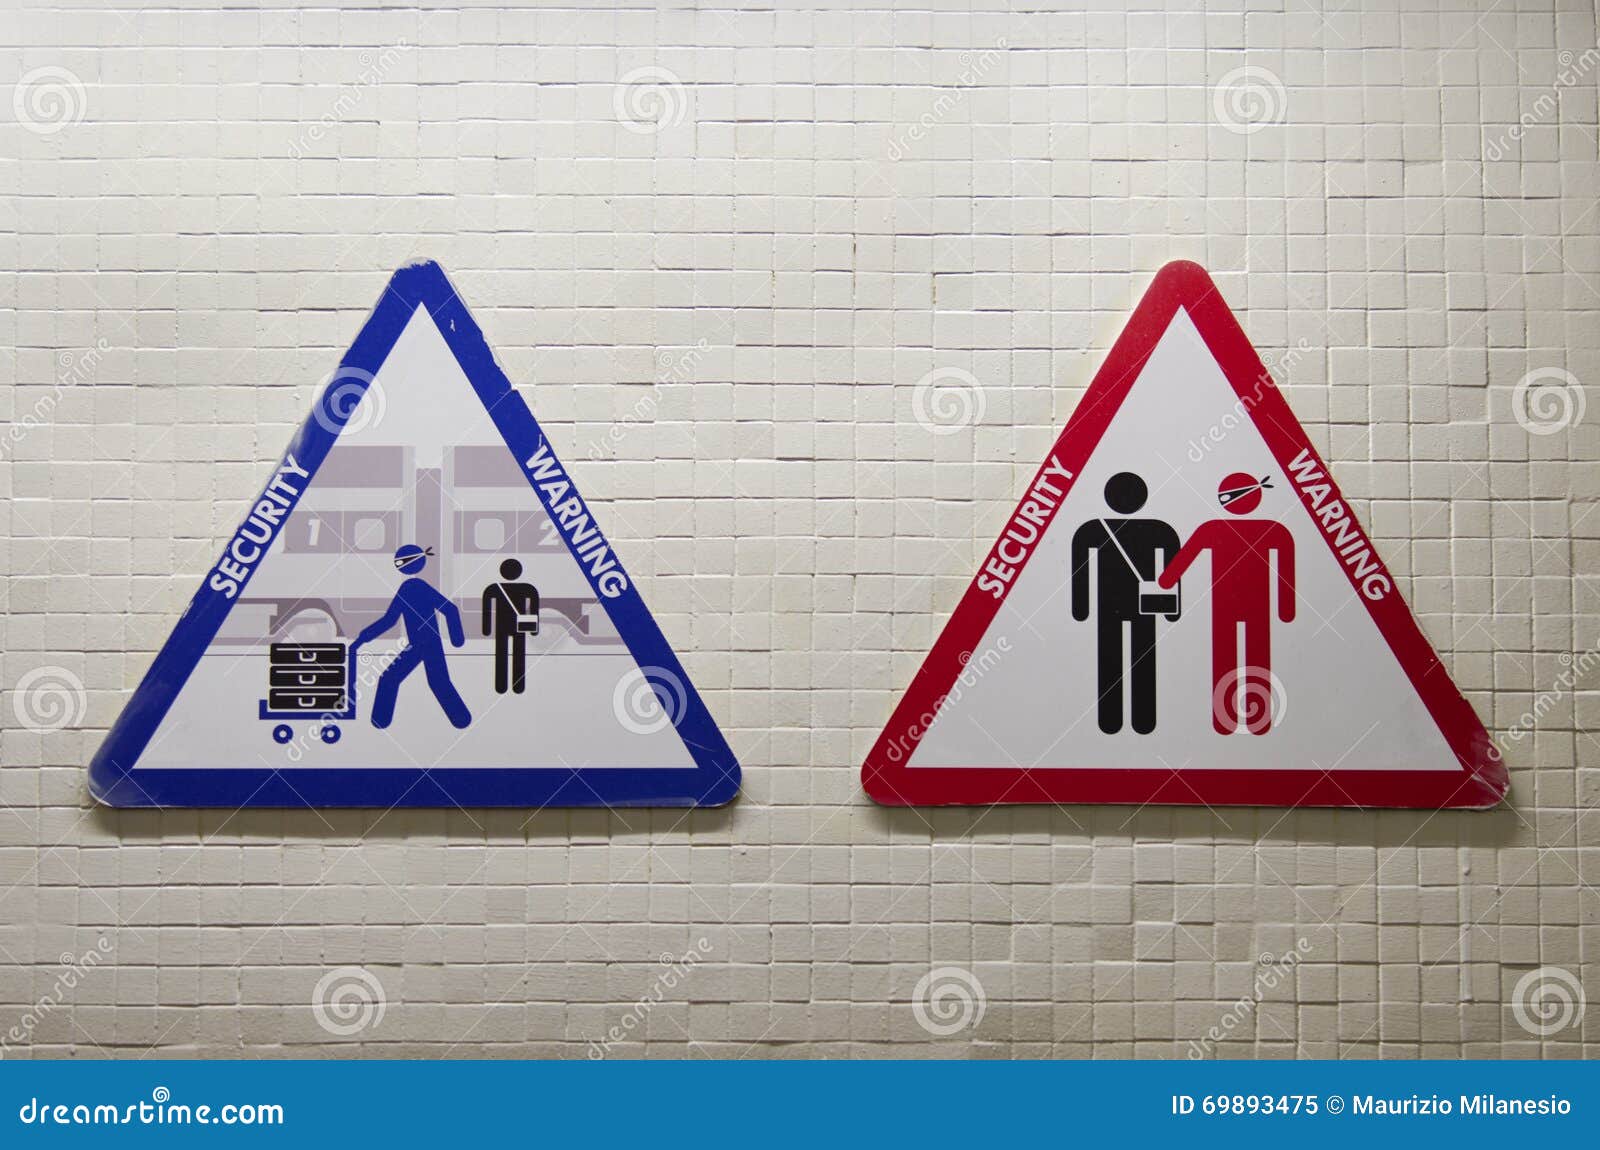 triangular sign to warn about the risk of being robbed